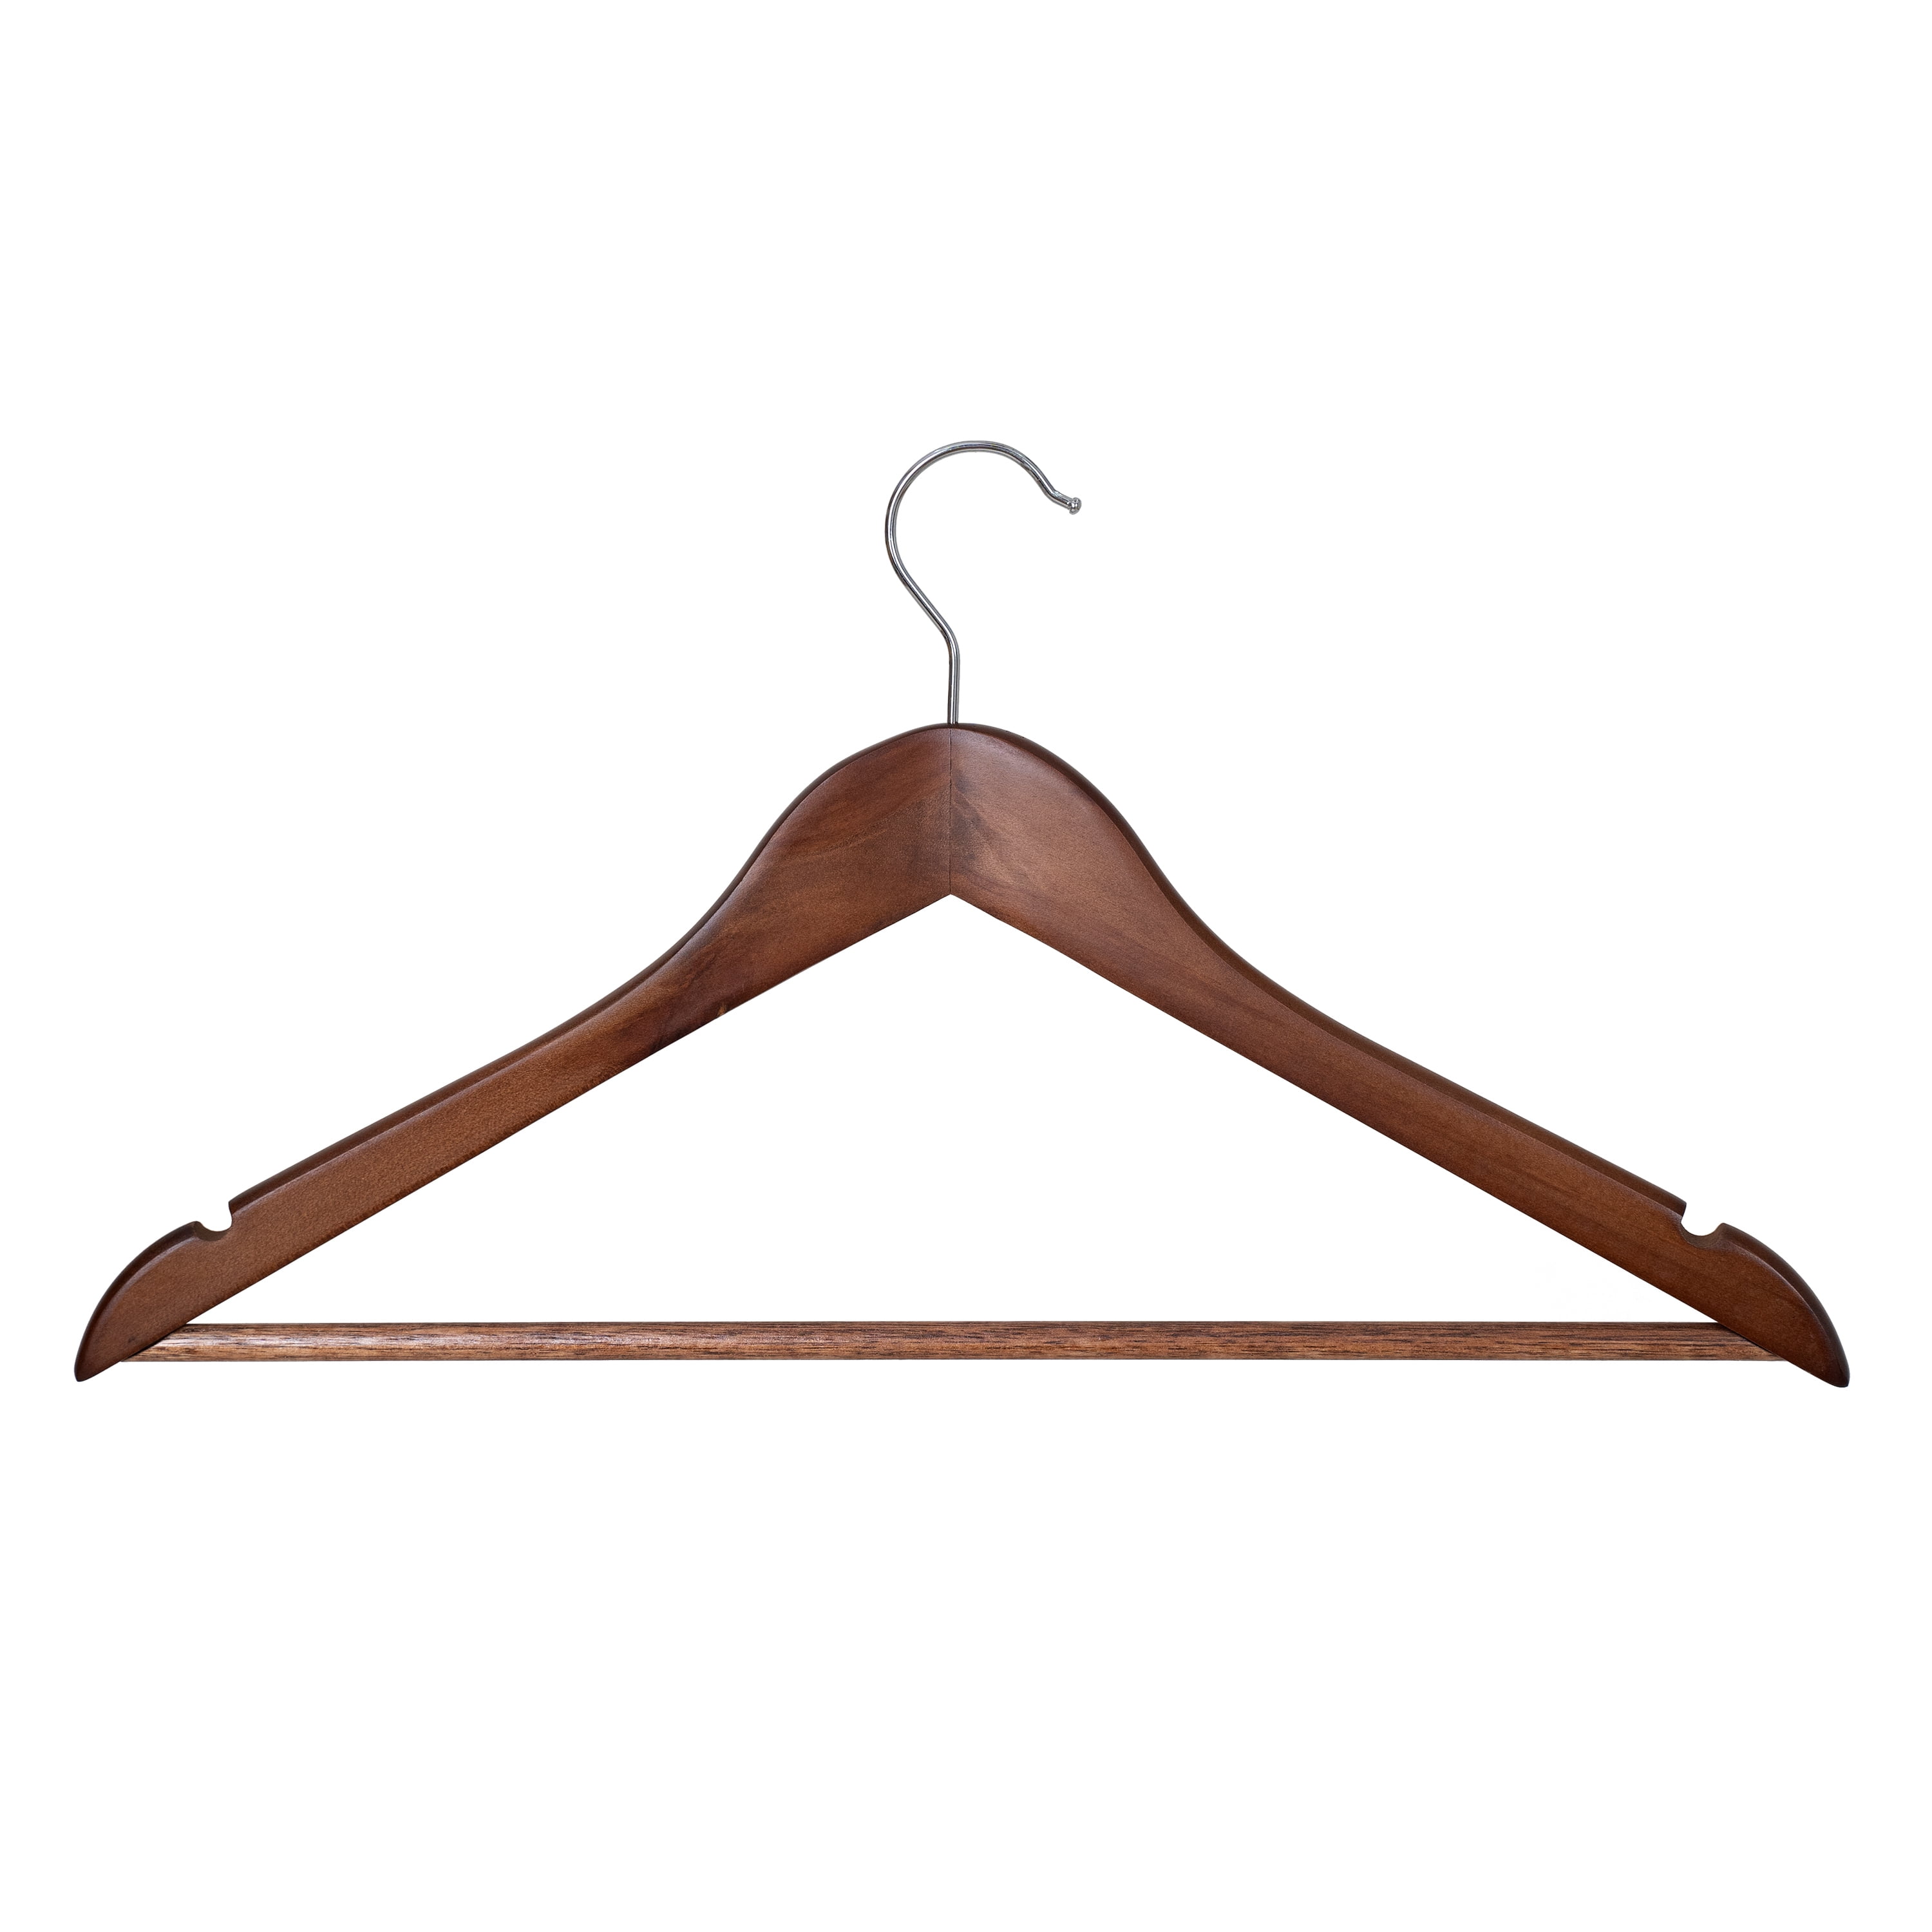 House & Home Kids Wooden Hangers - 5 Pack